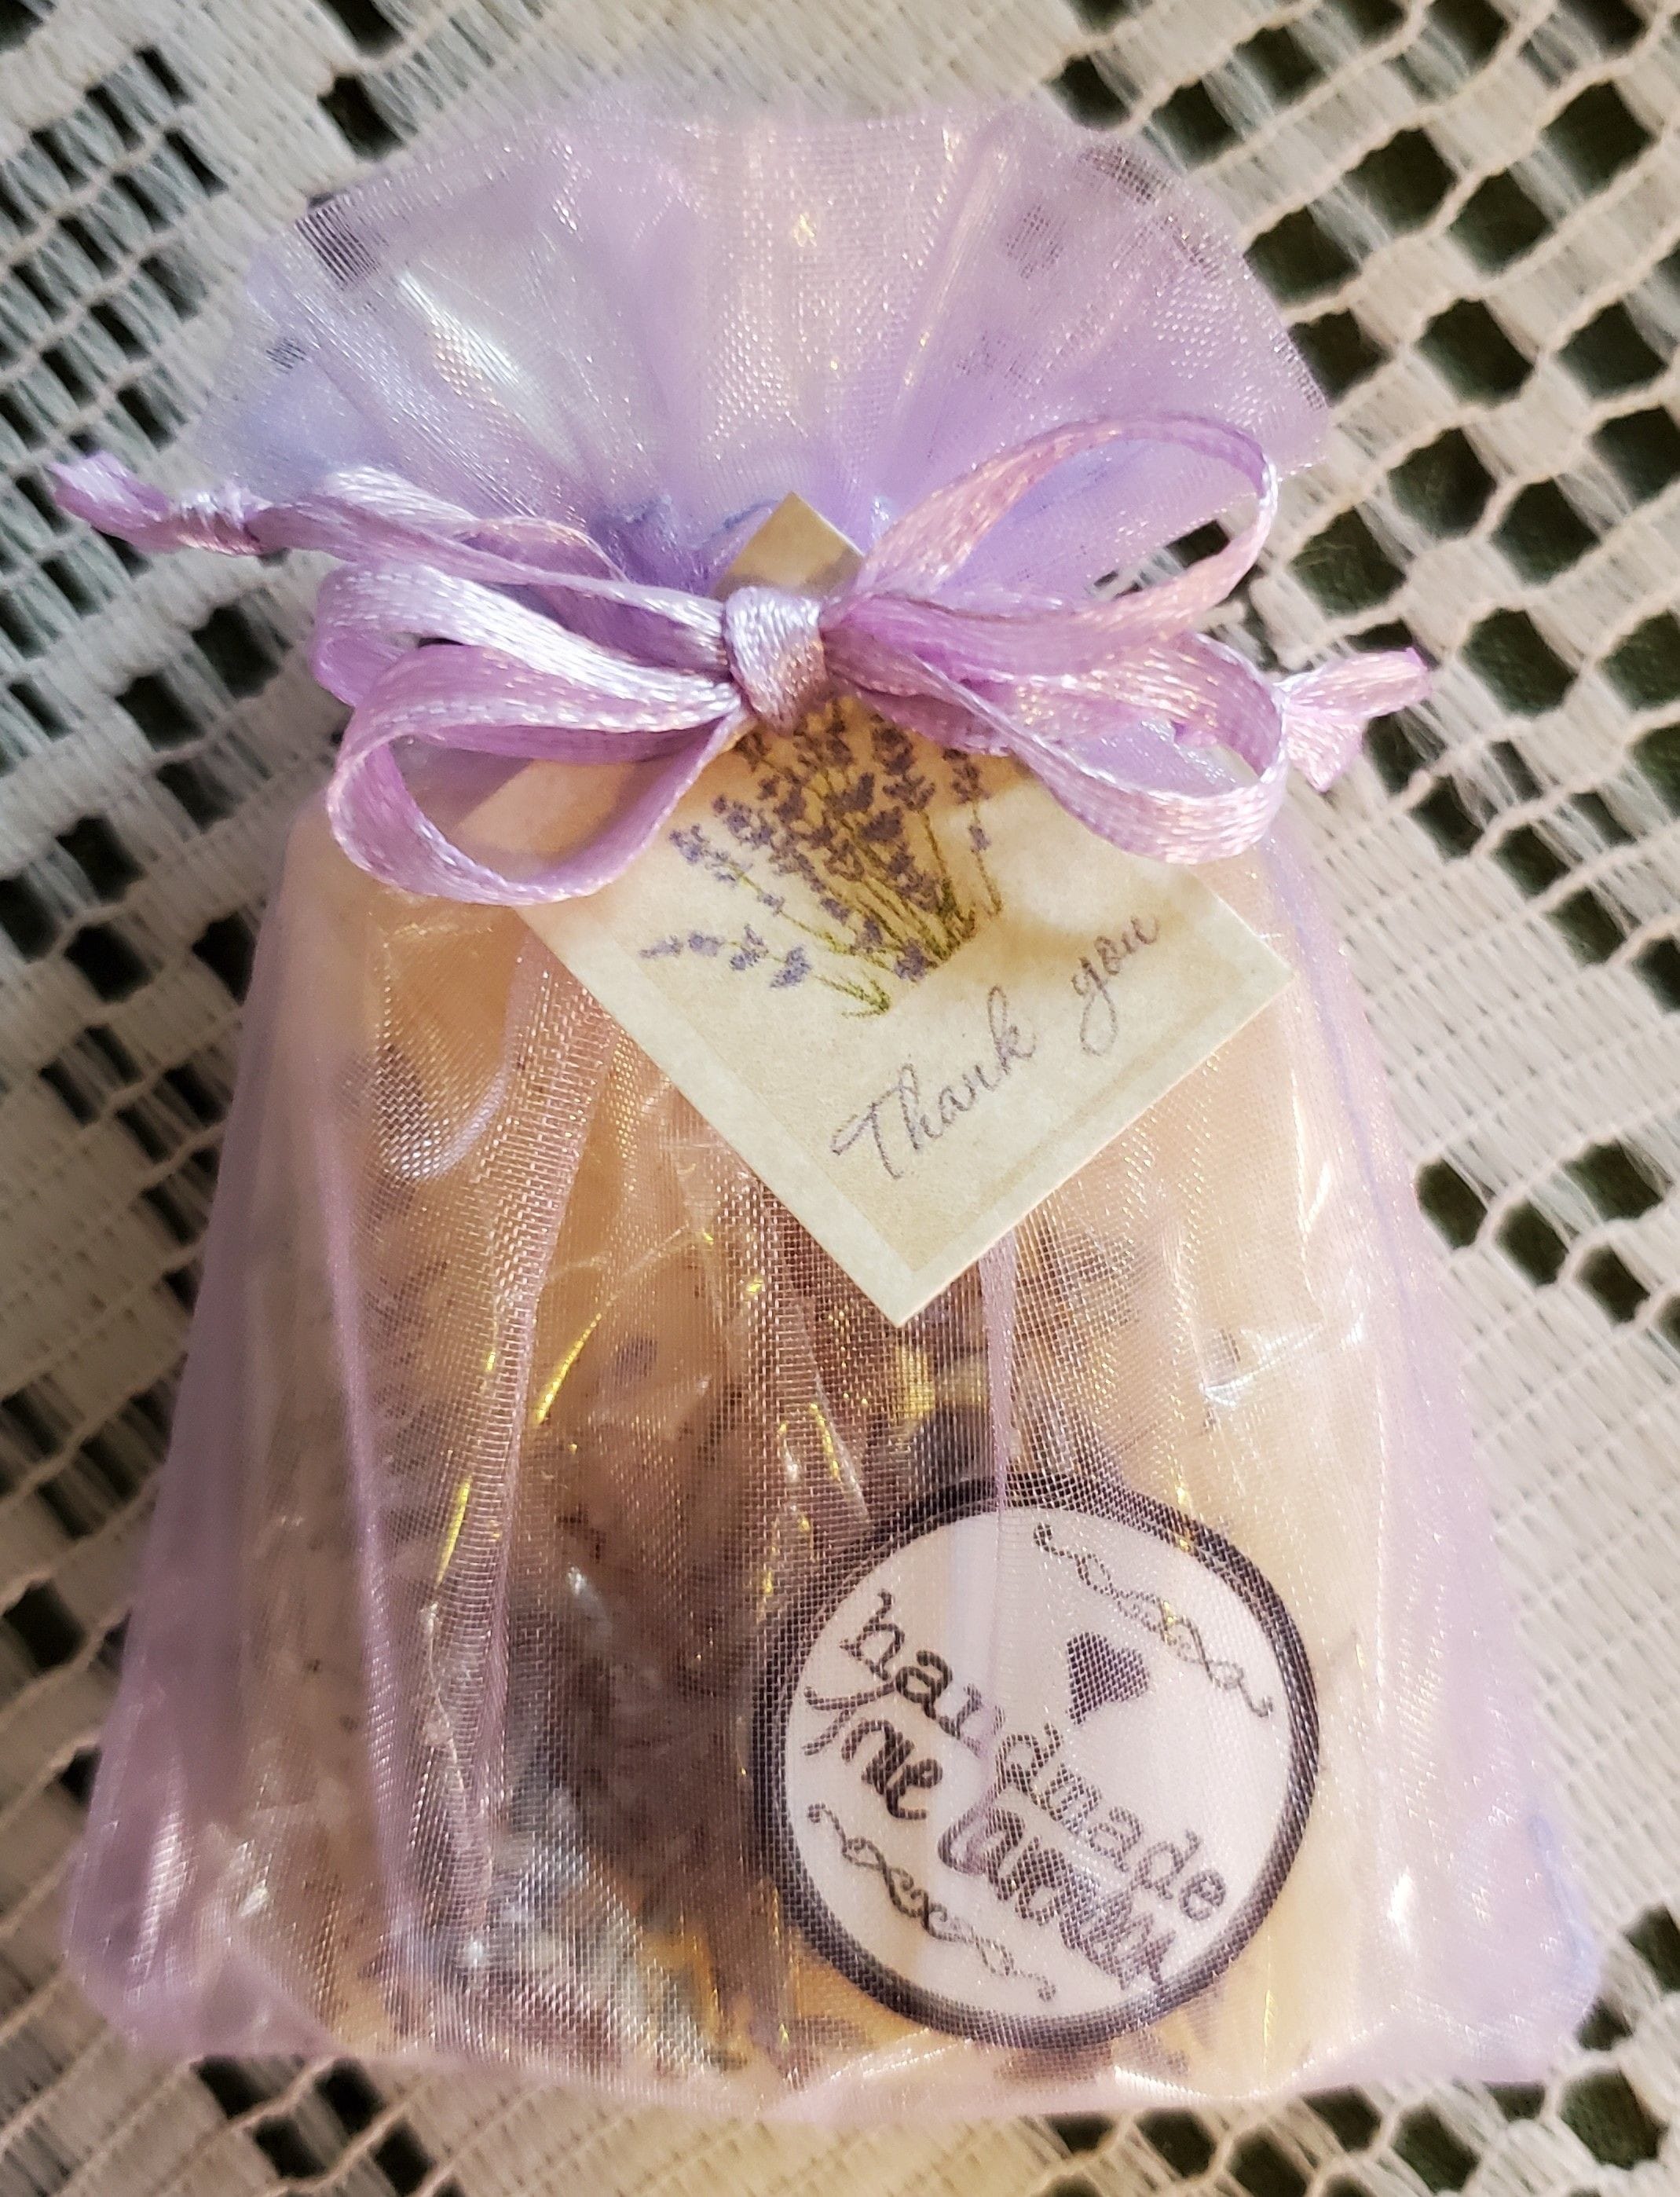 Our quality lavender soap favours are a beautiful gift favour for your guests with organic lavender buds to decorate.  Vegan, no animal testing.